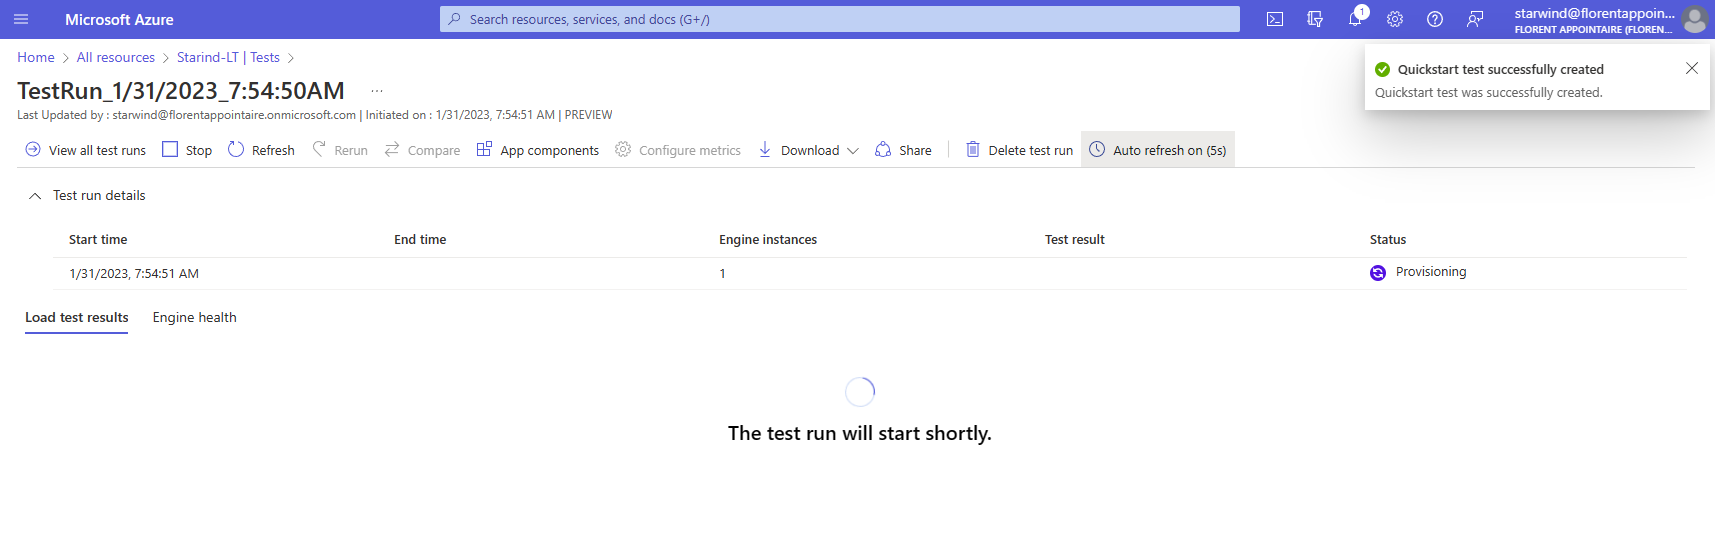 Click on Run test. The test is created and will start